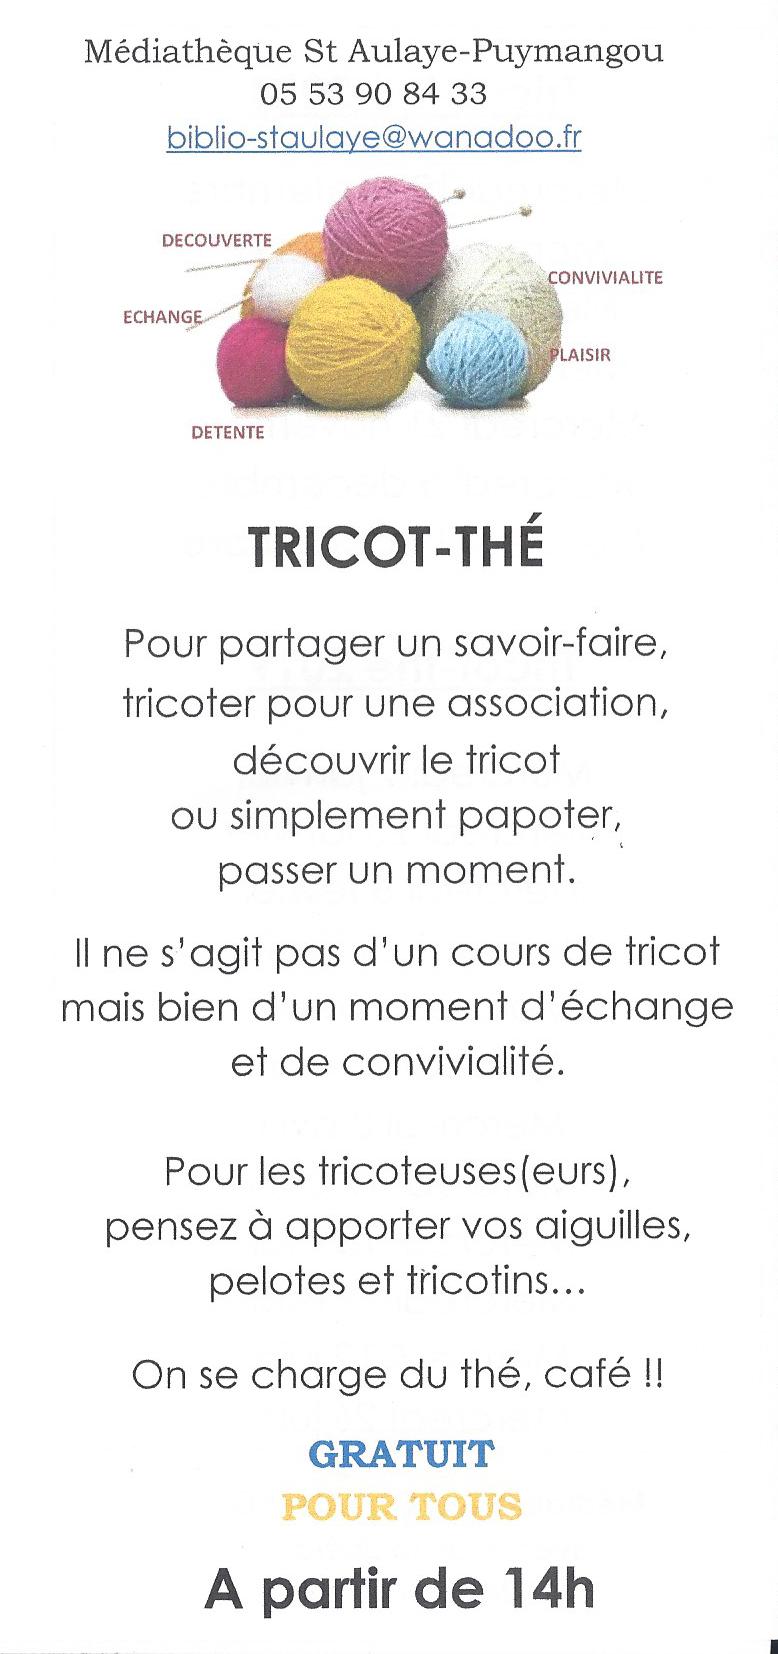 tricothe 2018 2019